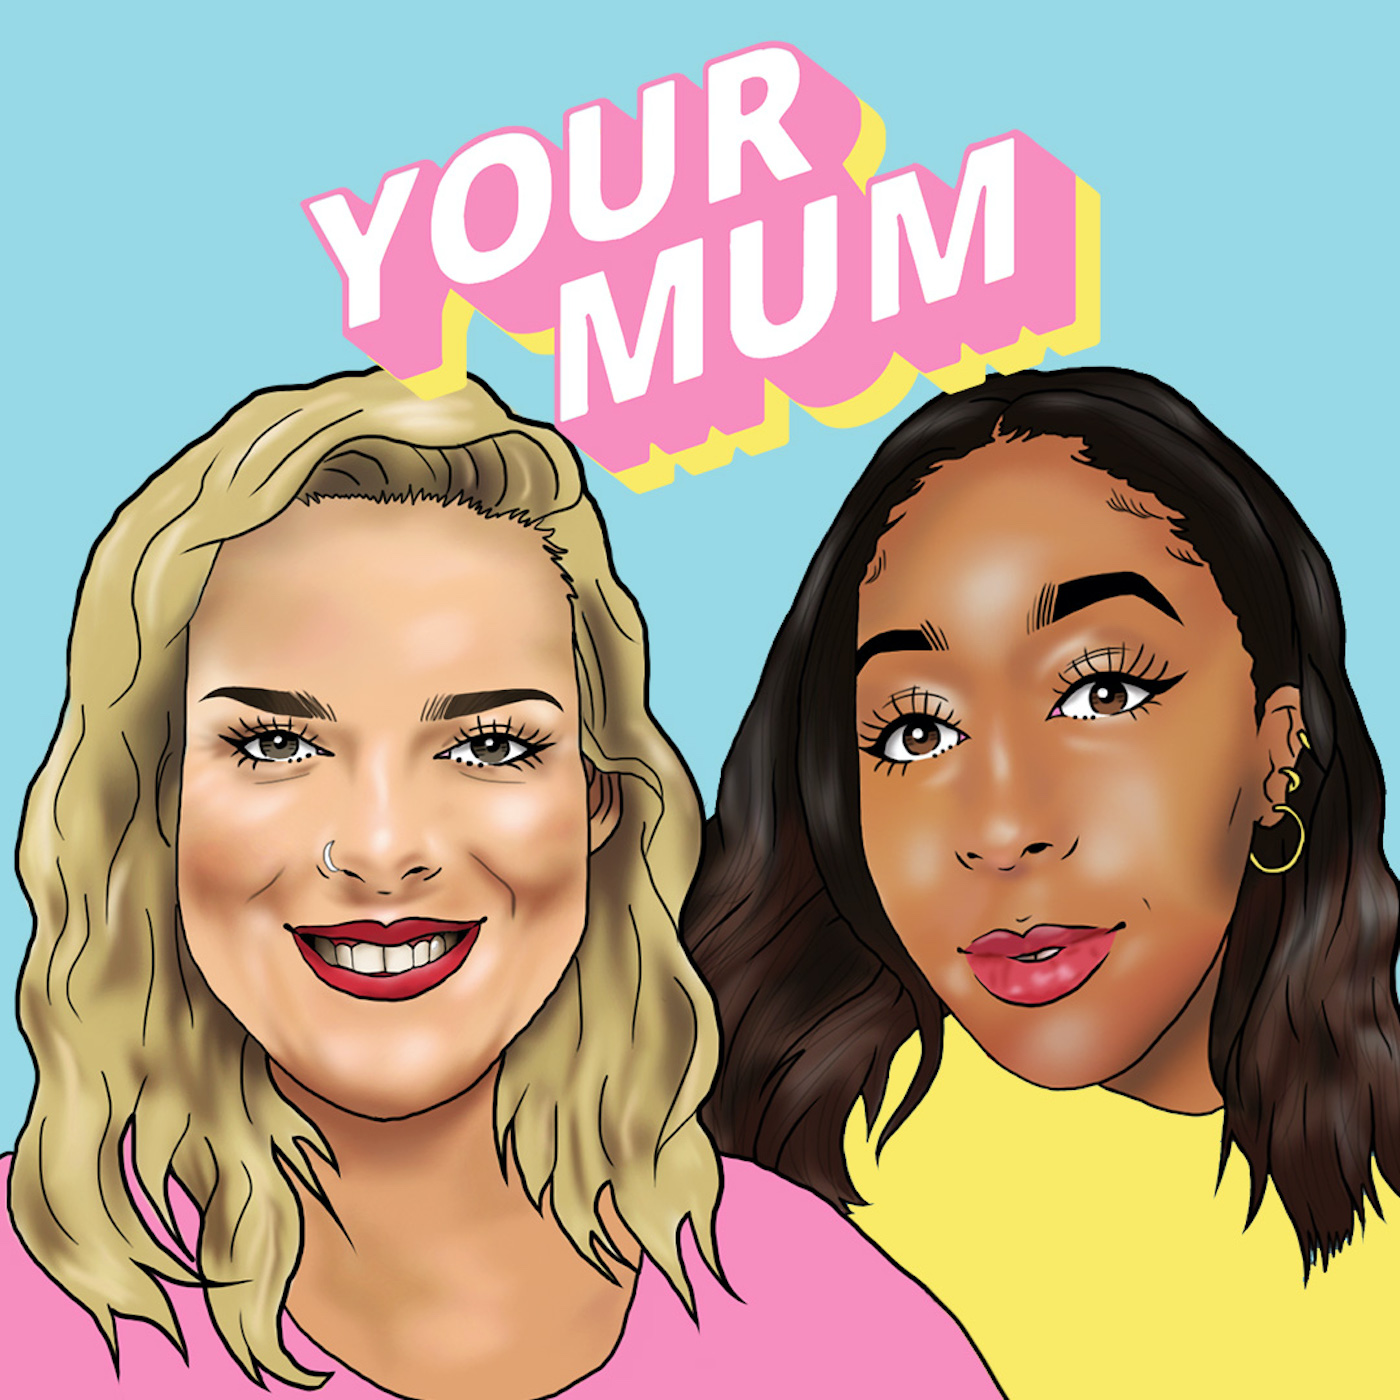 cover art for Your Mum ... and makeup